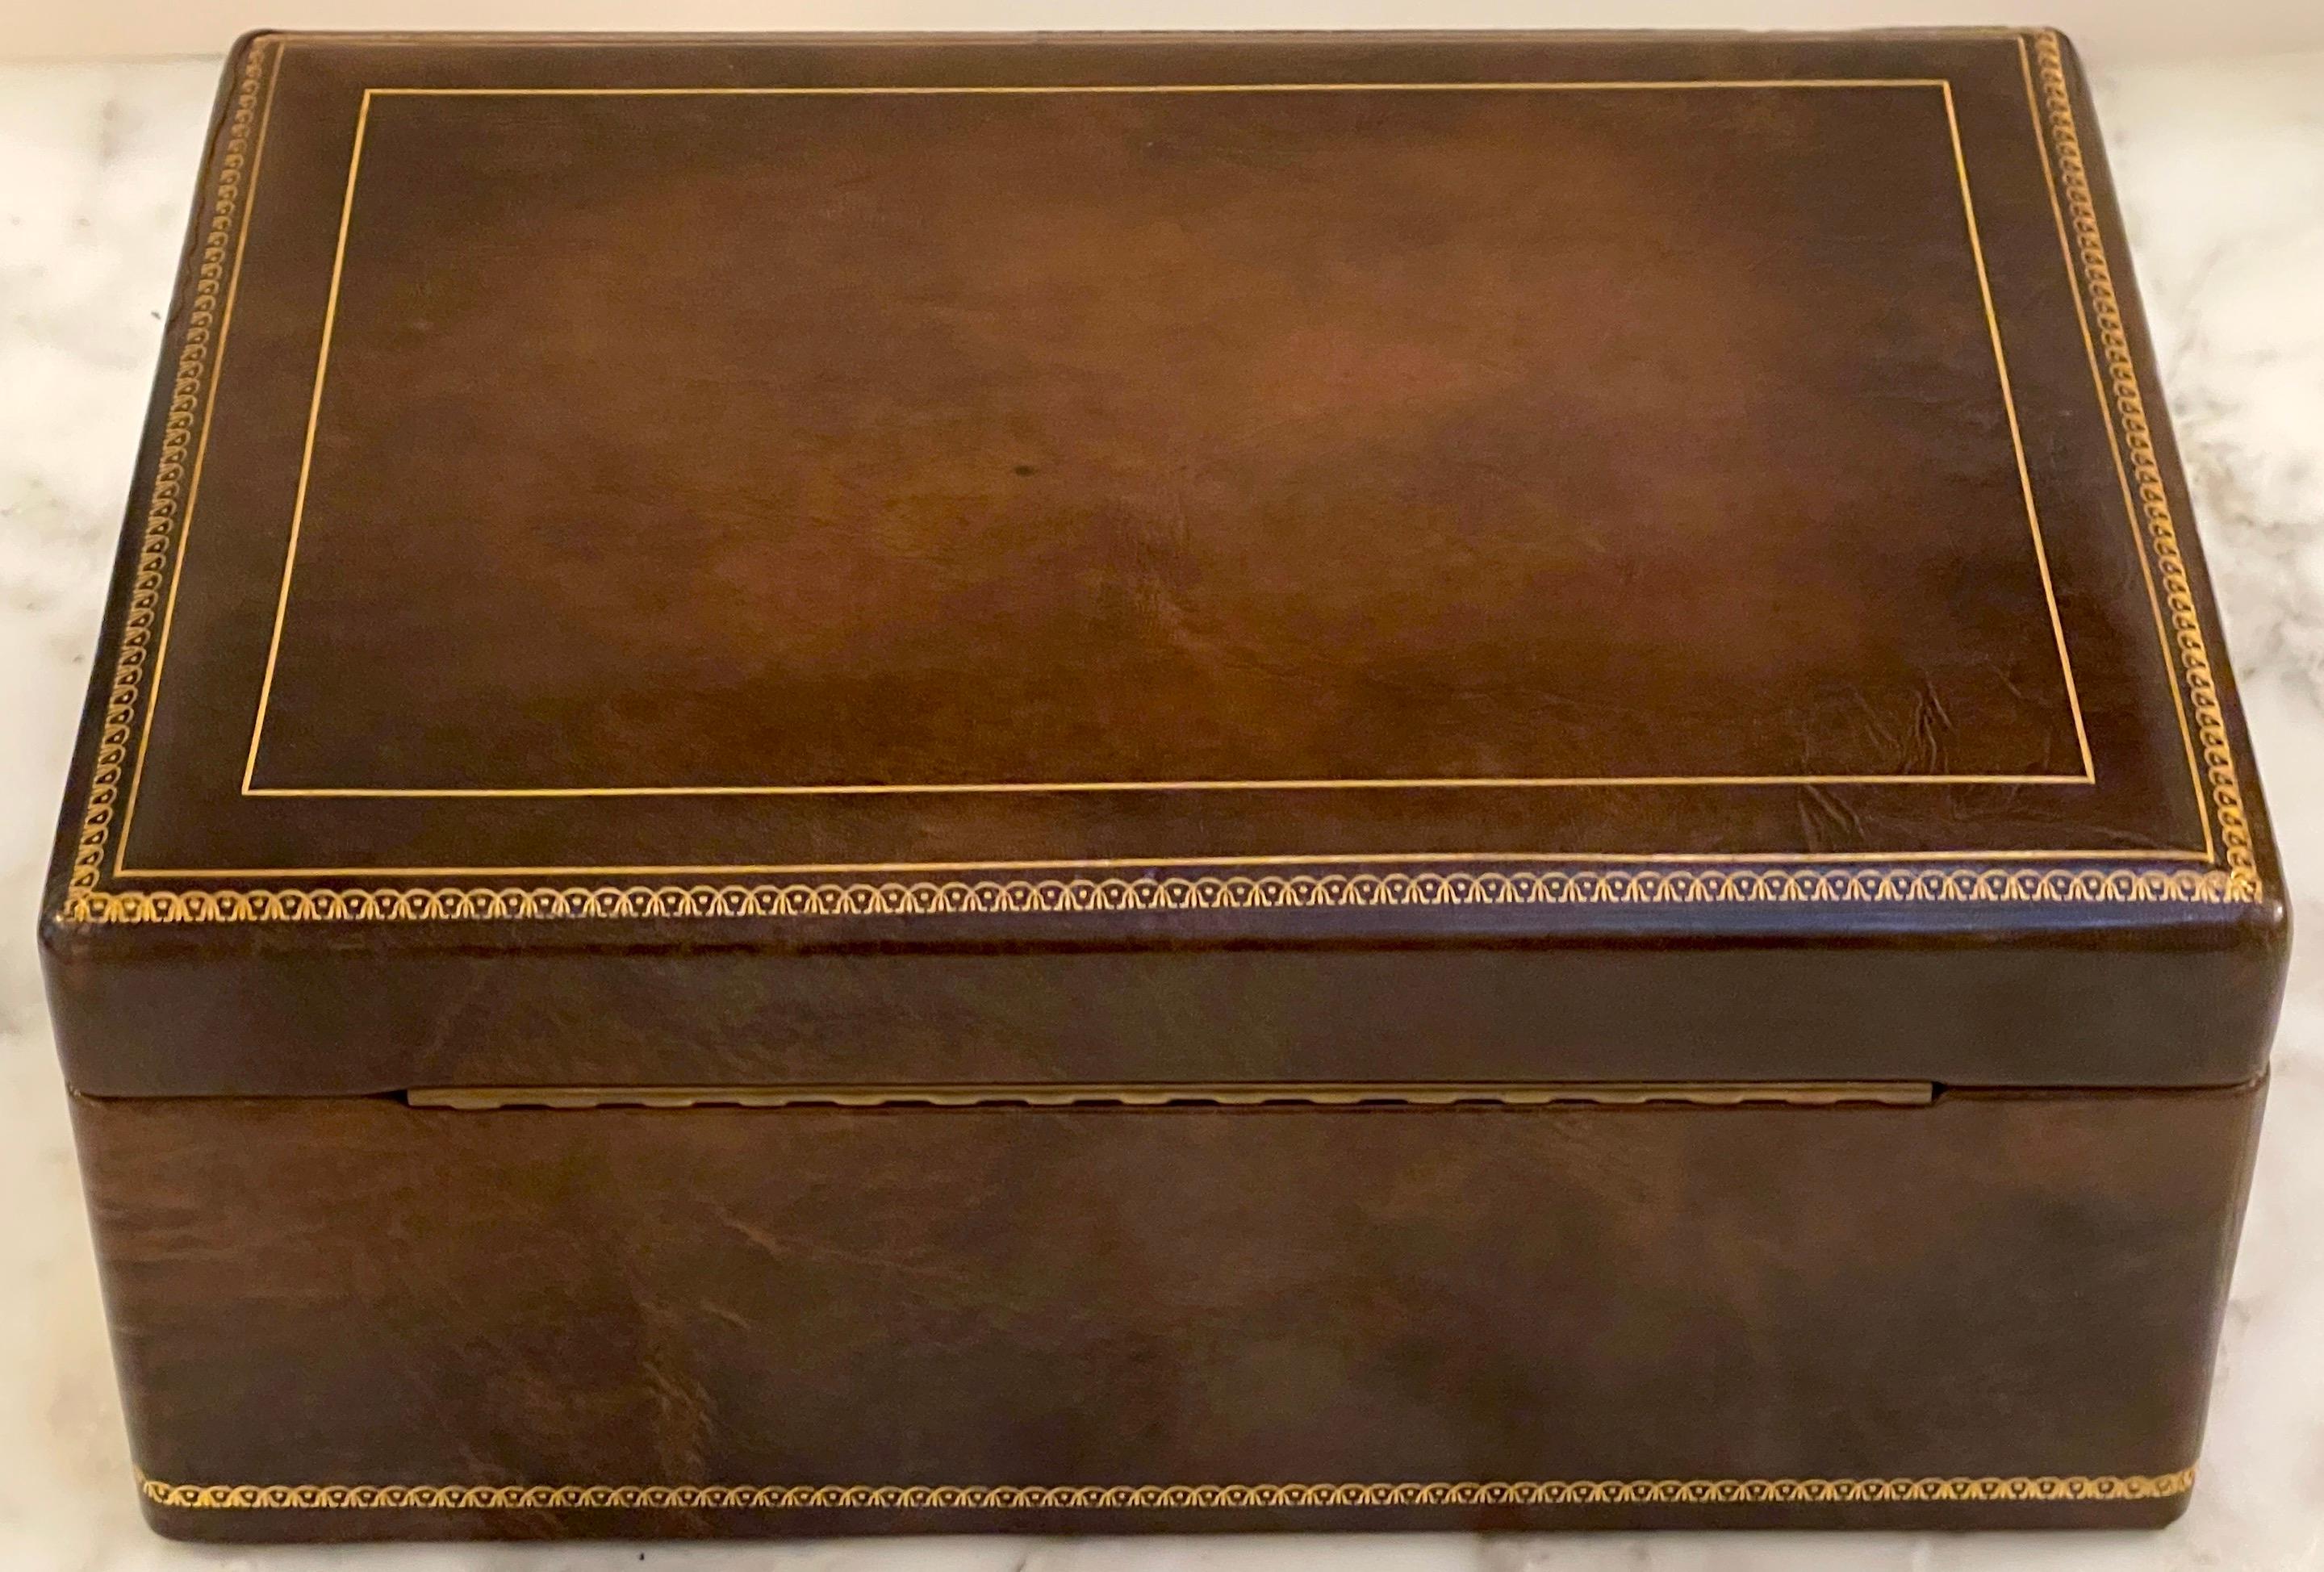 Italian Midcentury Brown Leather Neoclassical Humidor with Gilt Tooling For Sale 2